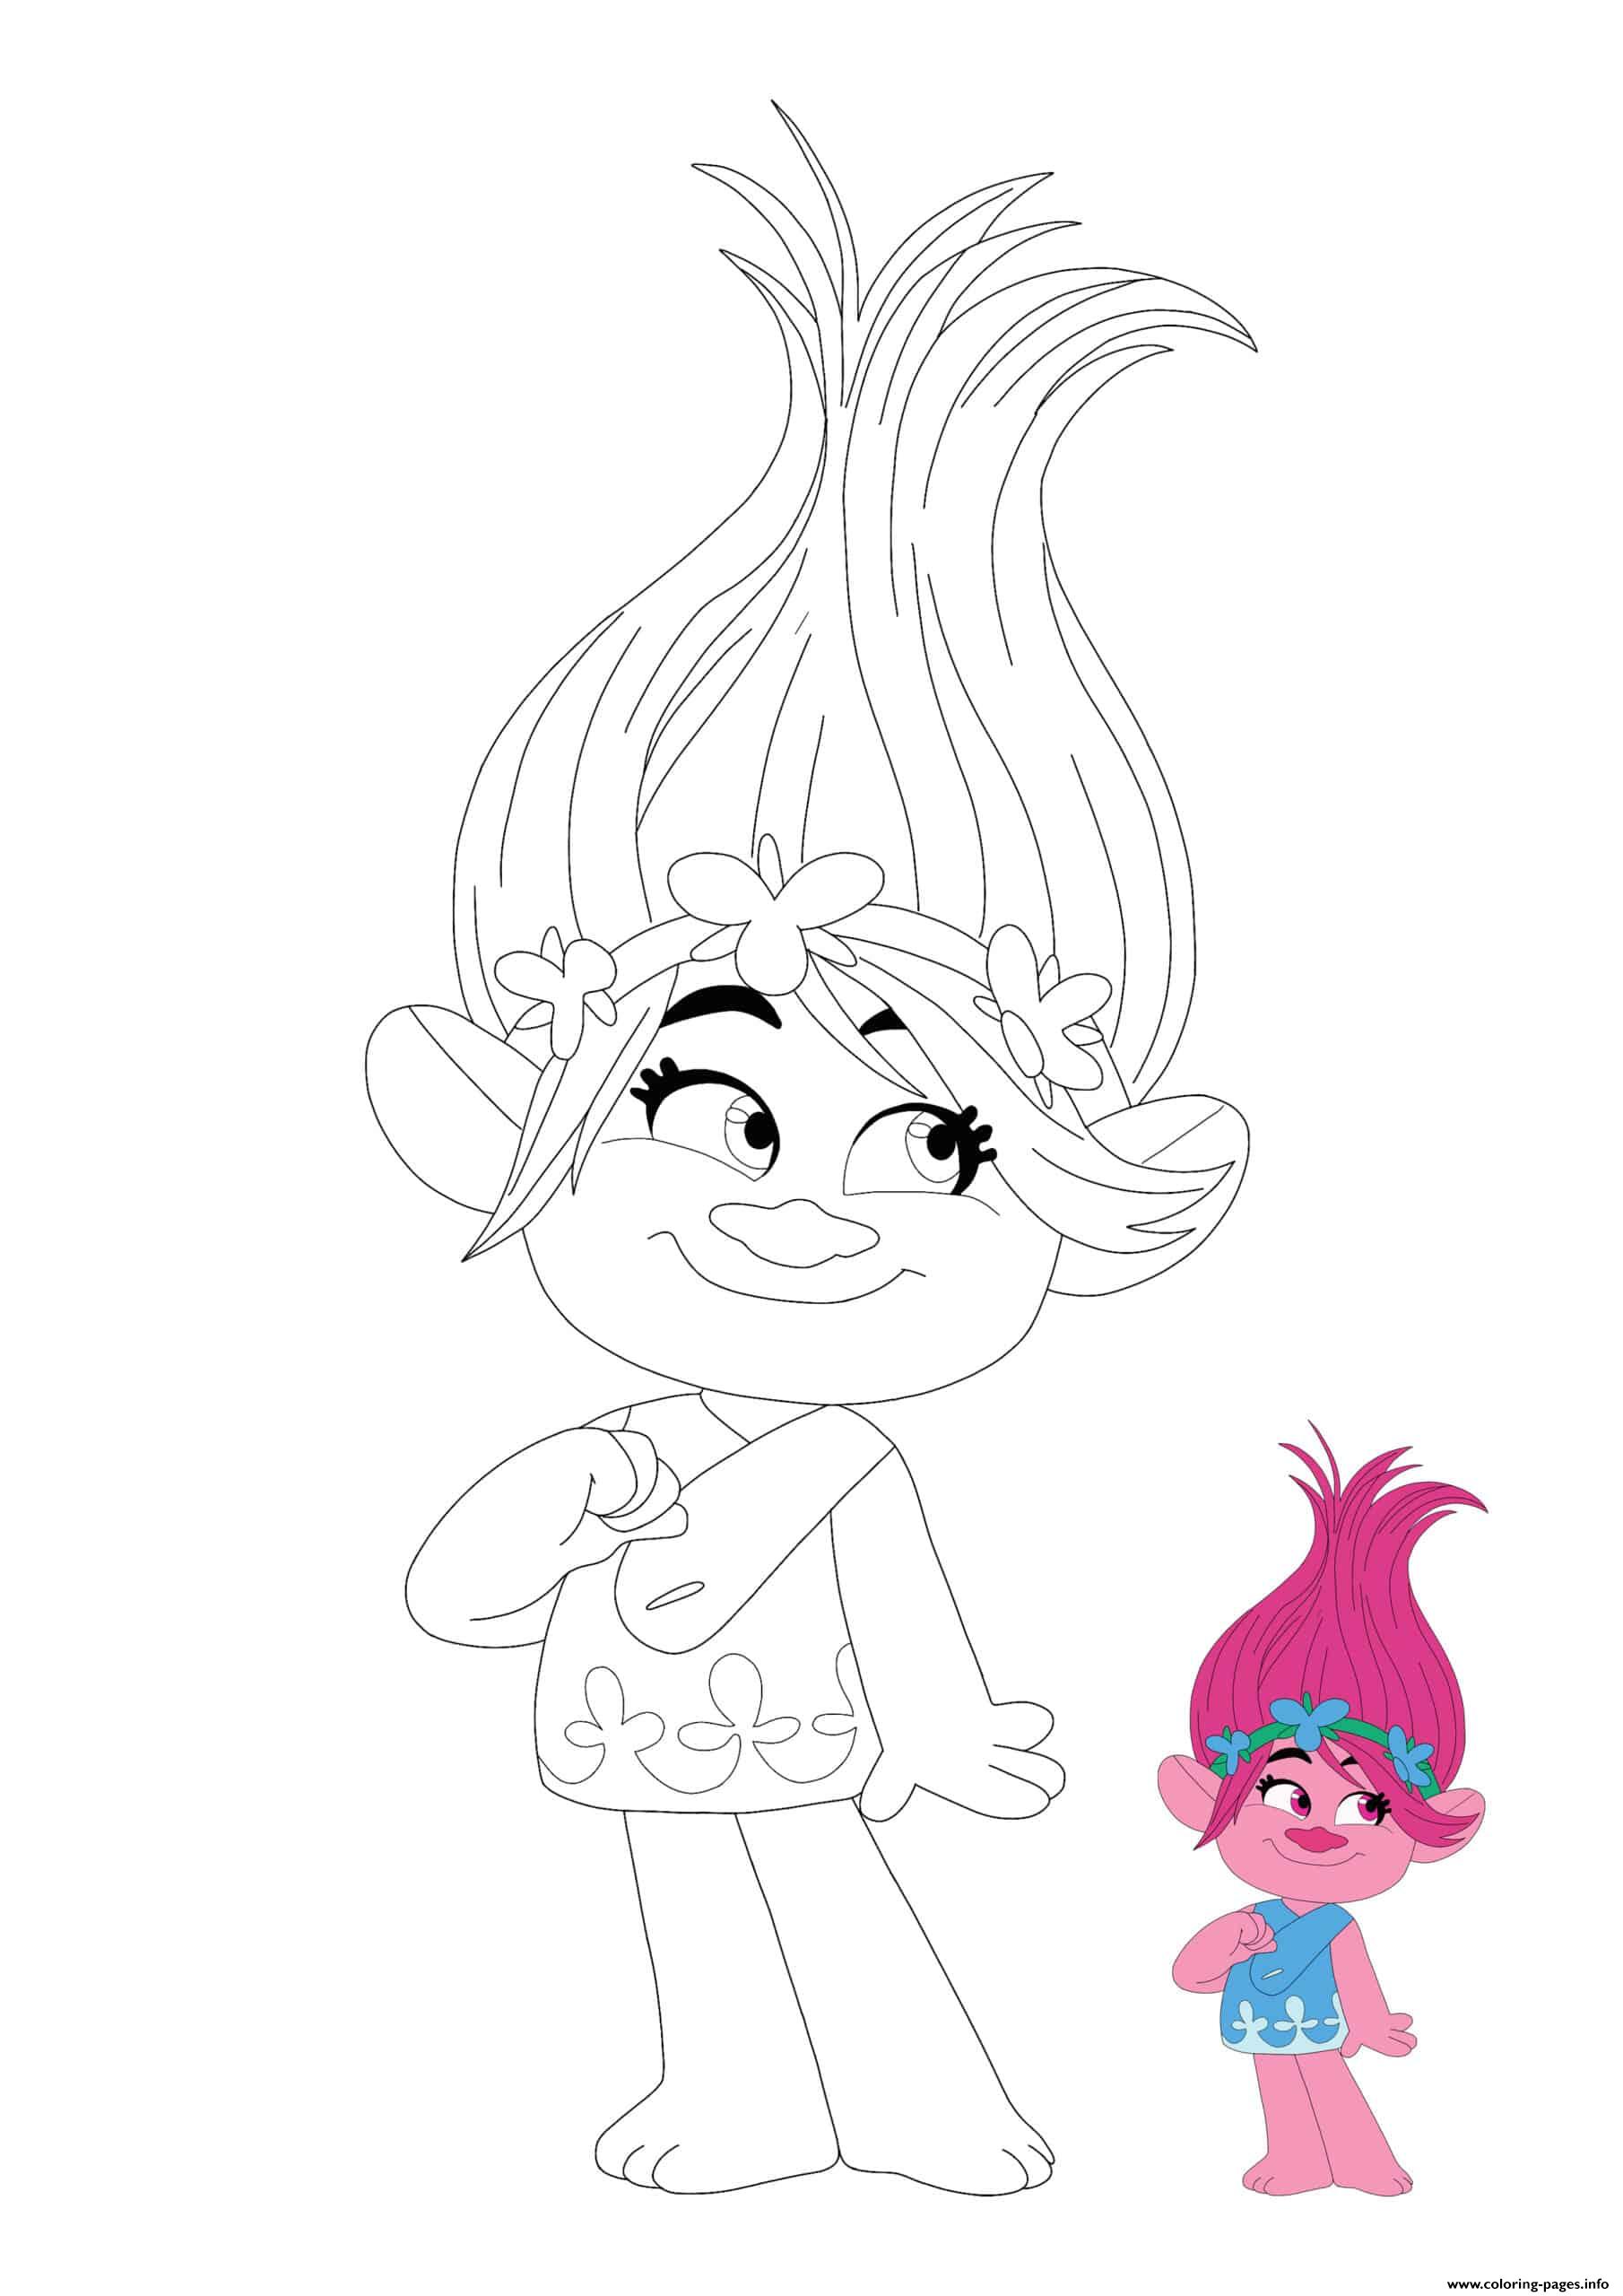 Princess Poppy From Trolls coloring